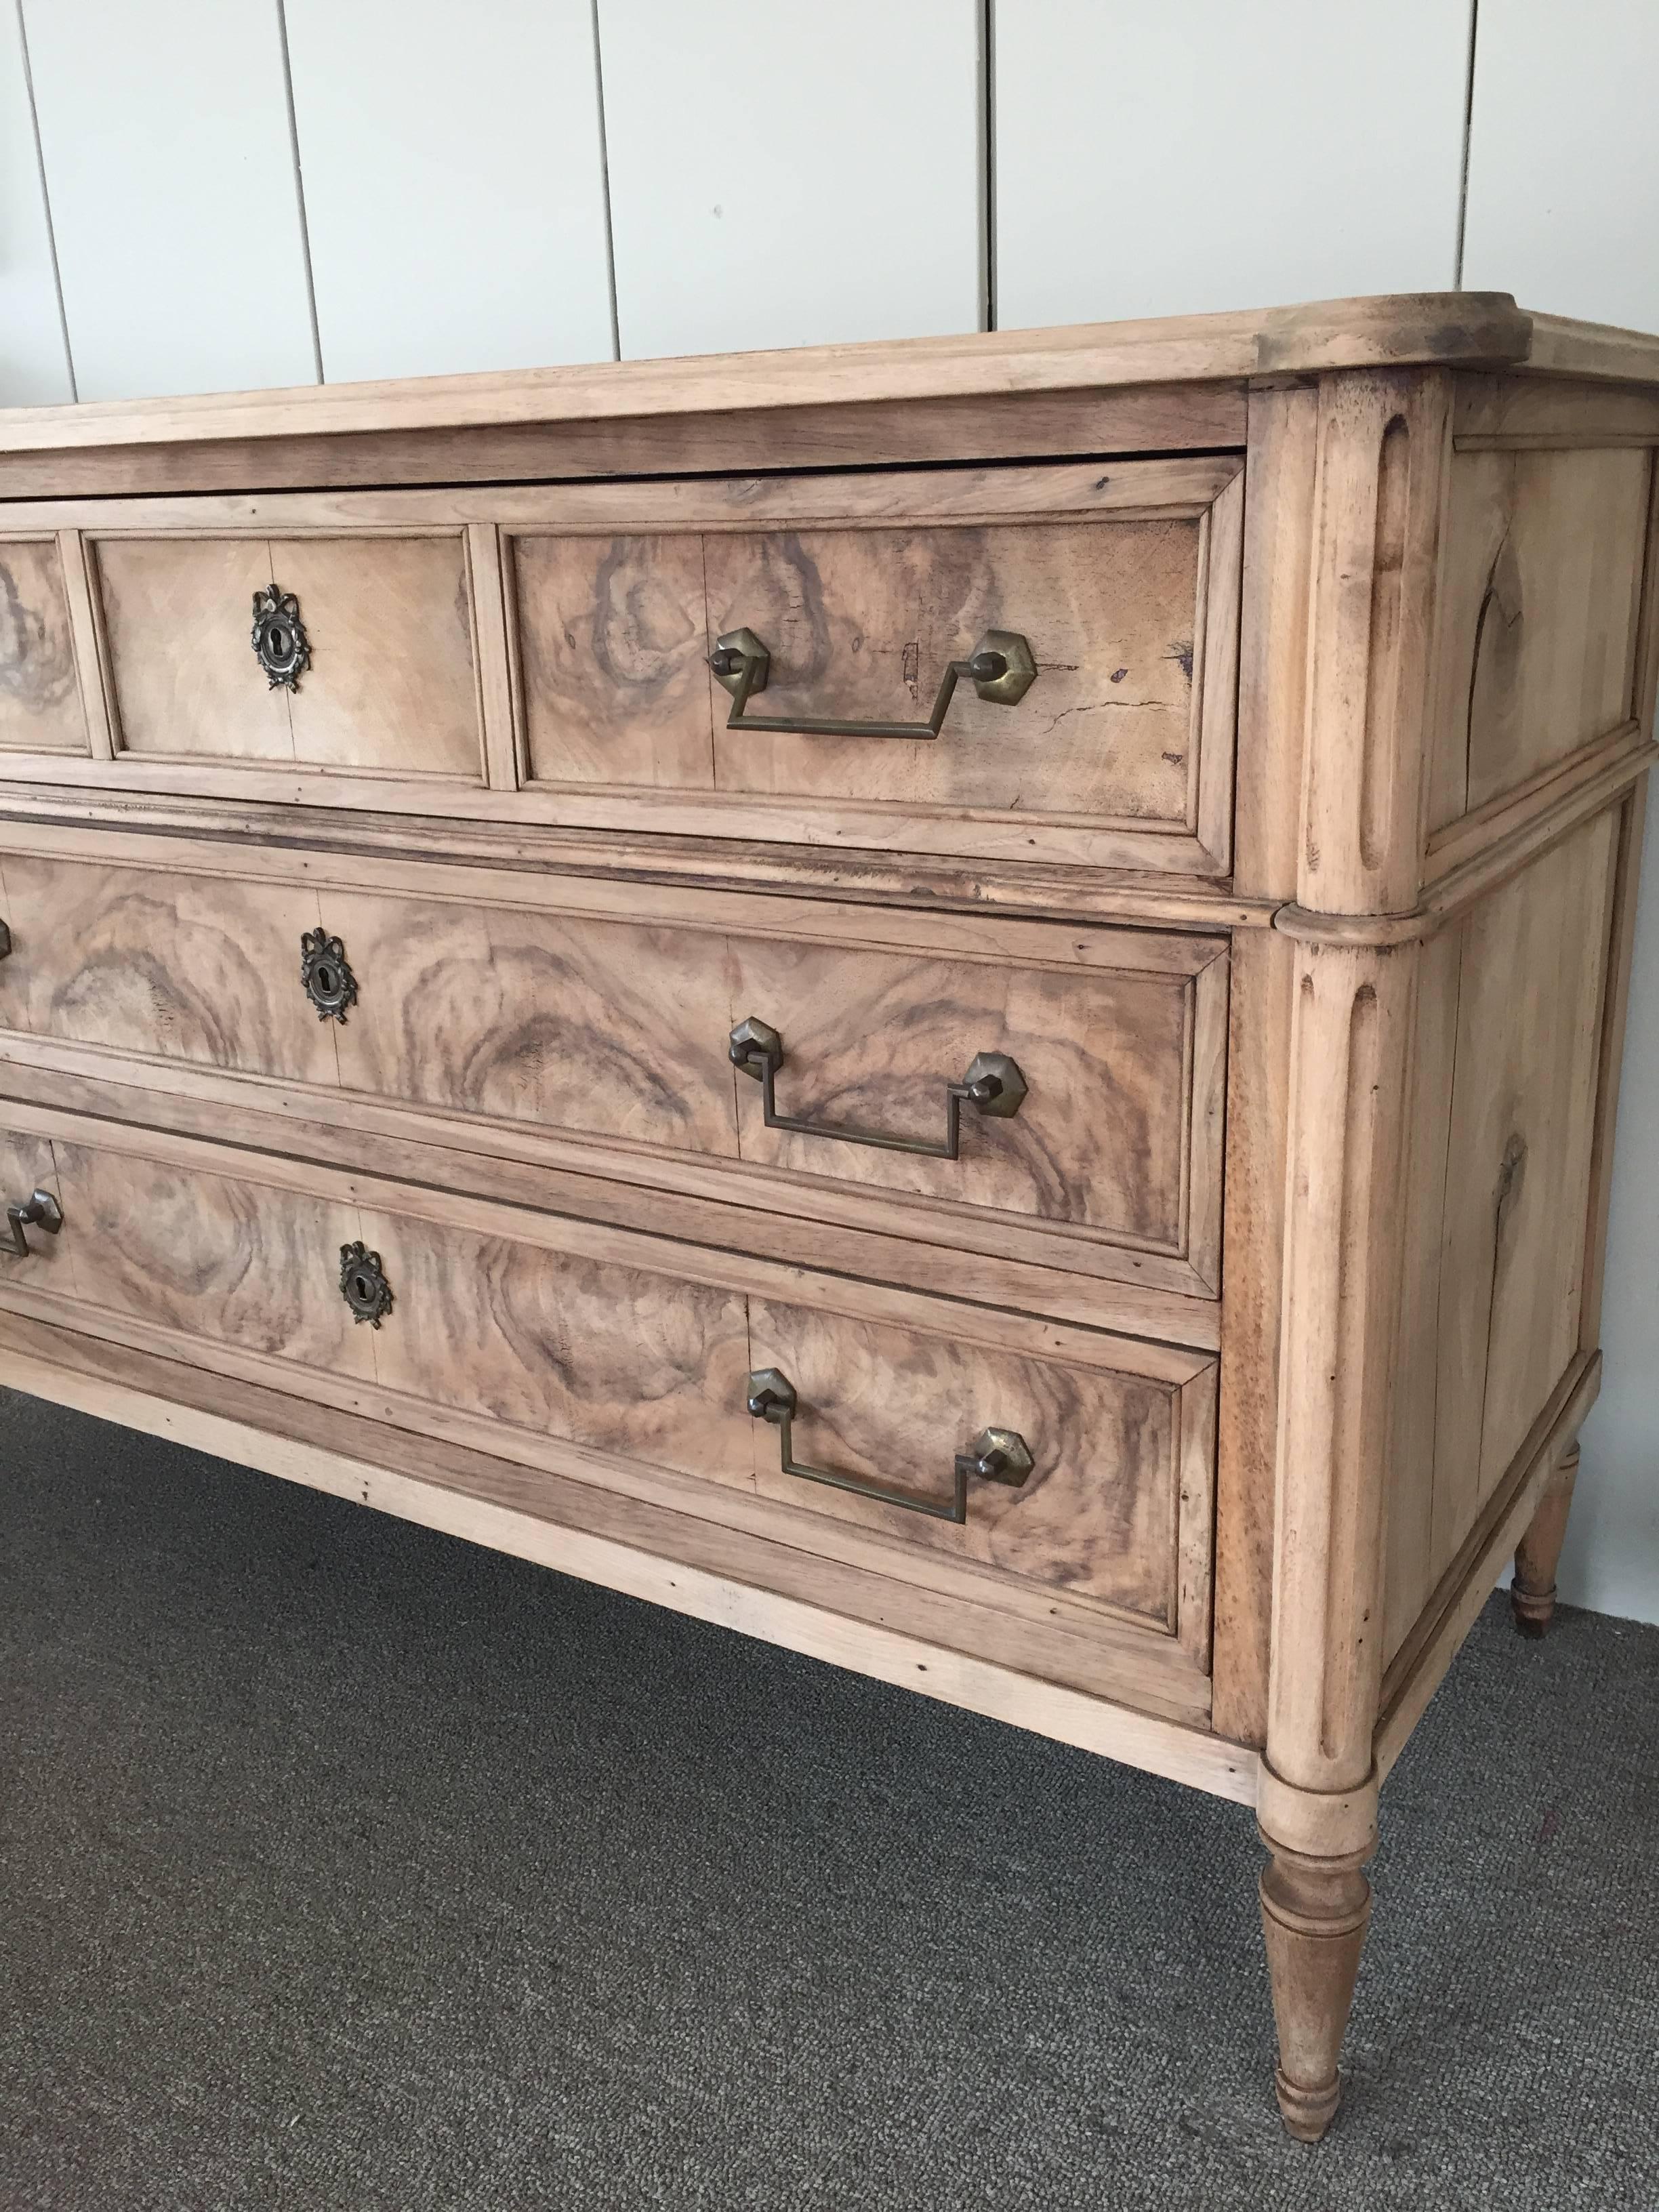 Bleached walnut commode or chest of drawers, having three drawer's facades and supported on curved and fluted stiles sitting on turned toupee feet.